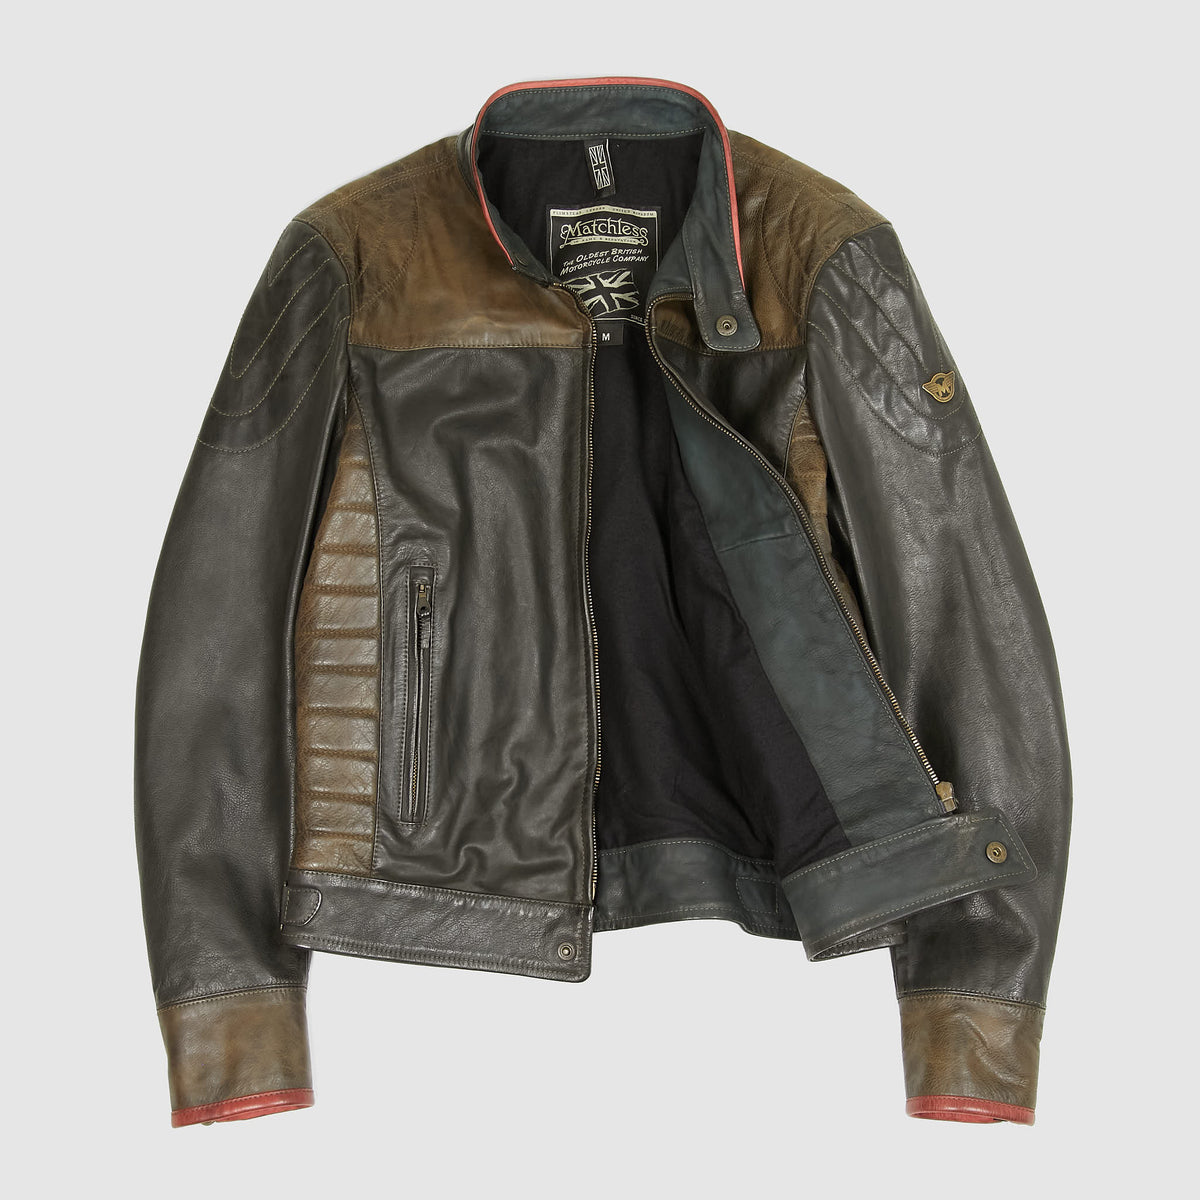 Matchless Model x Reloaded 2 Tone Leather Jacket